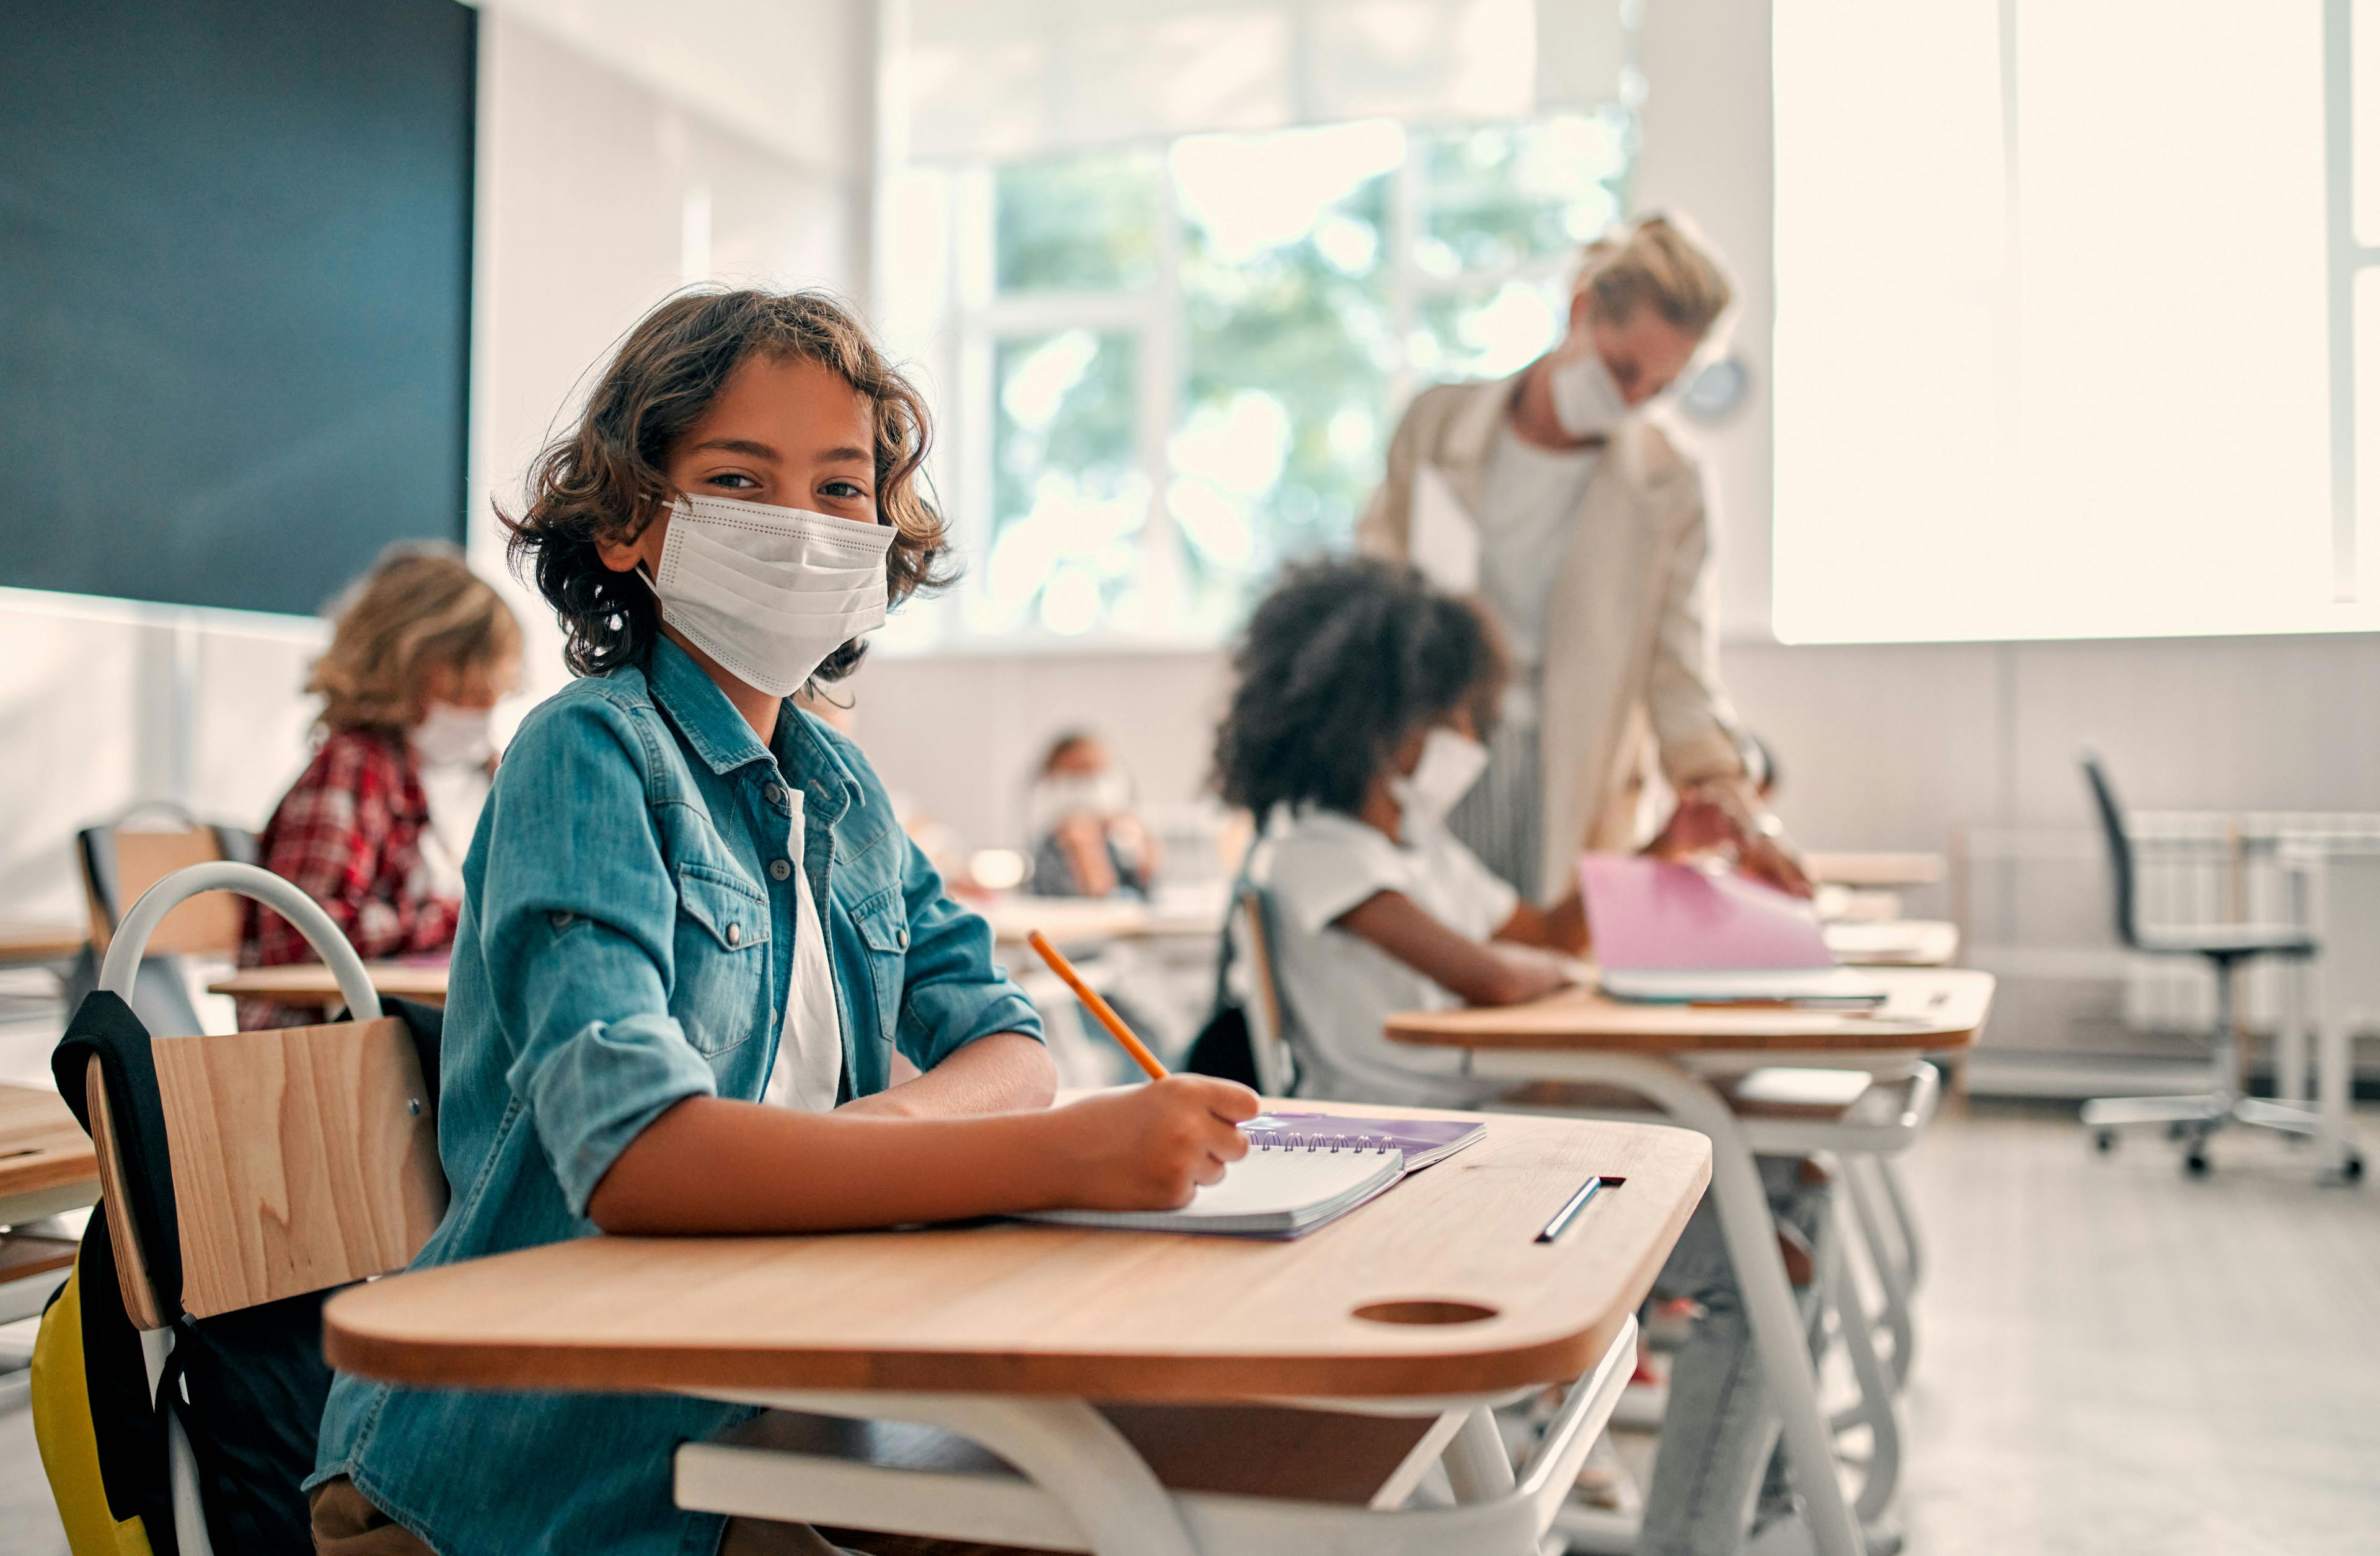 This study determined the efficacy of face masks at reducing exhaled particles in children, as well as whether the type of activity affected the concentration and size of particles.